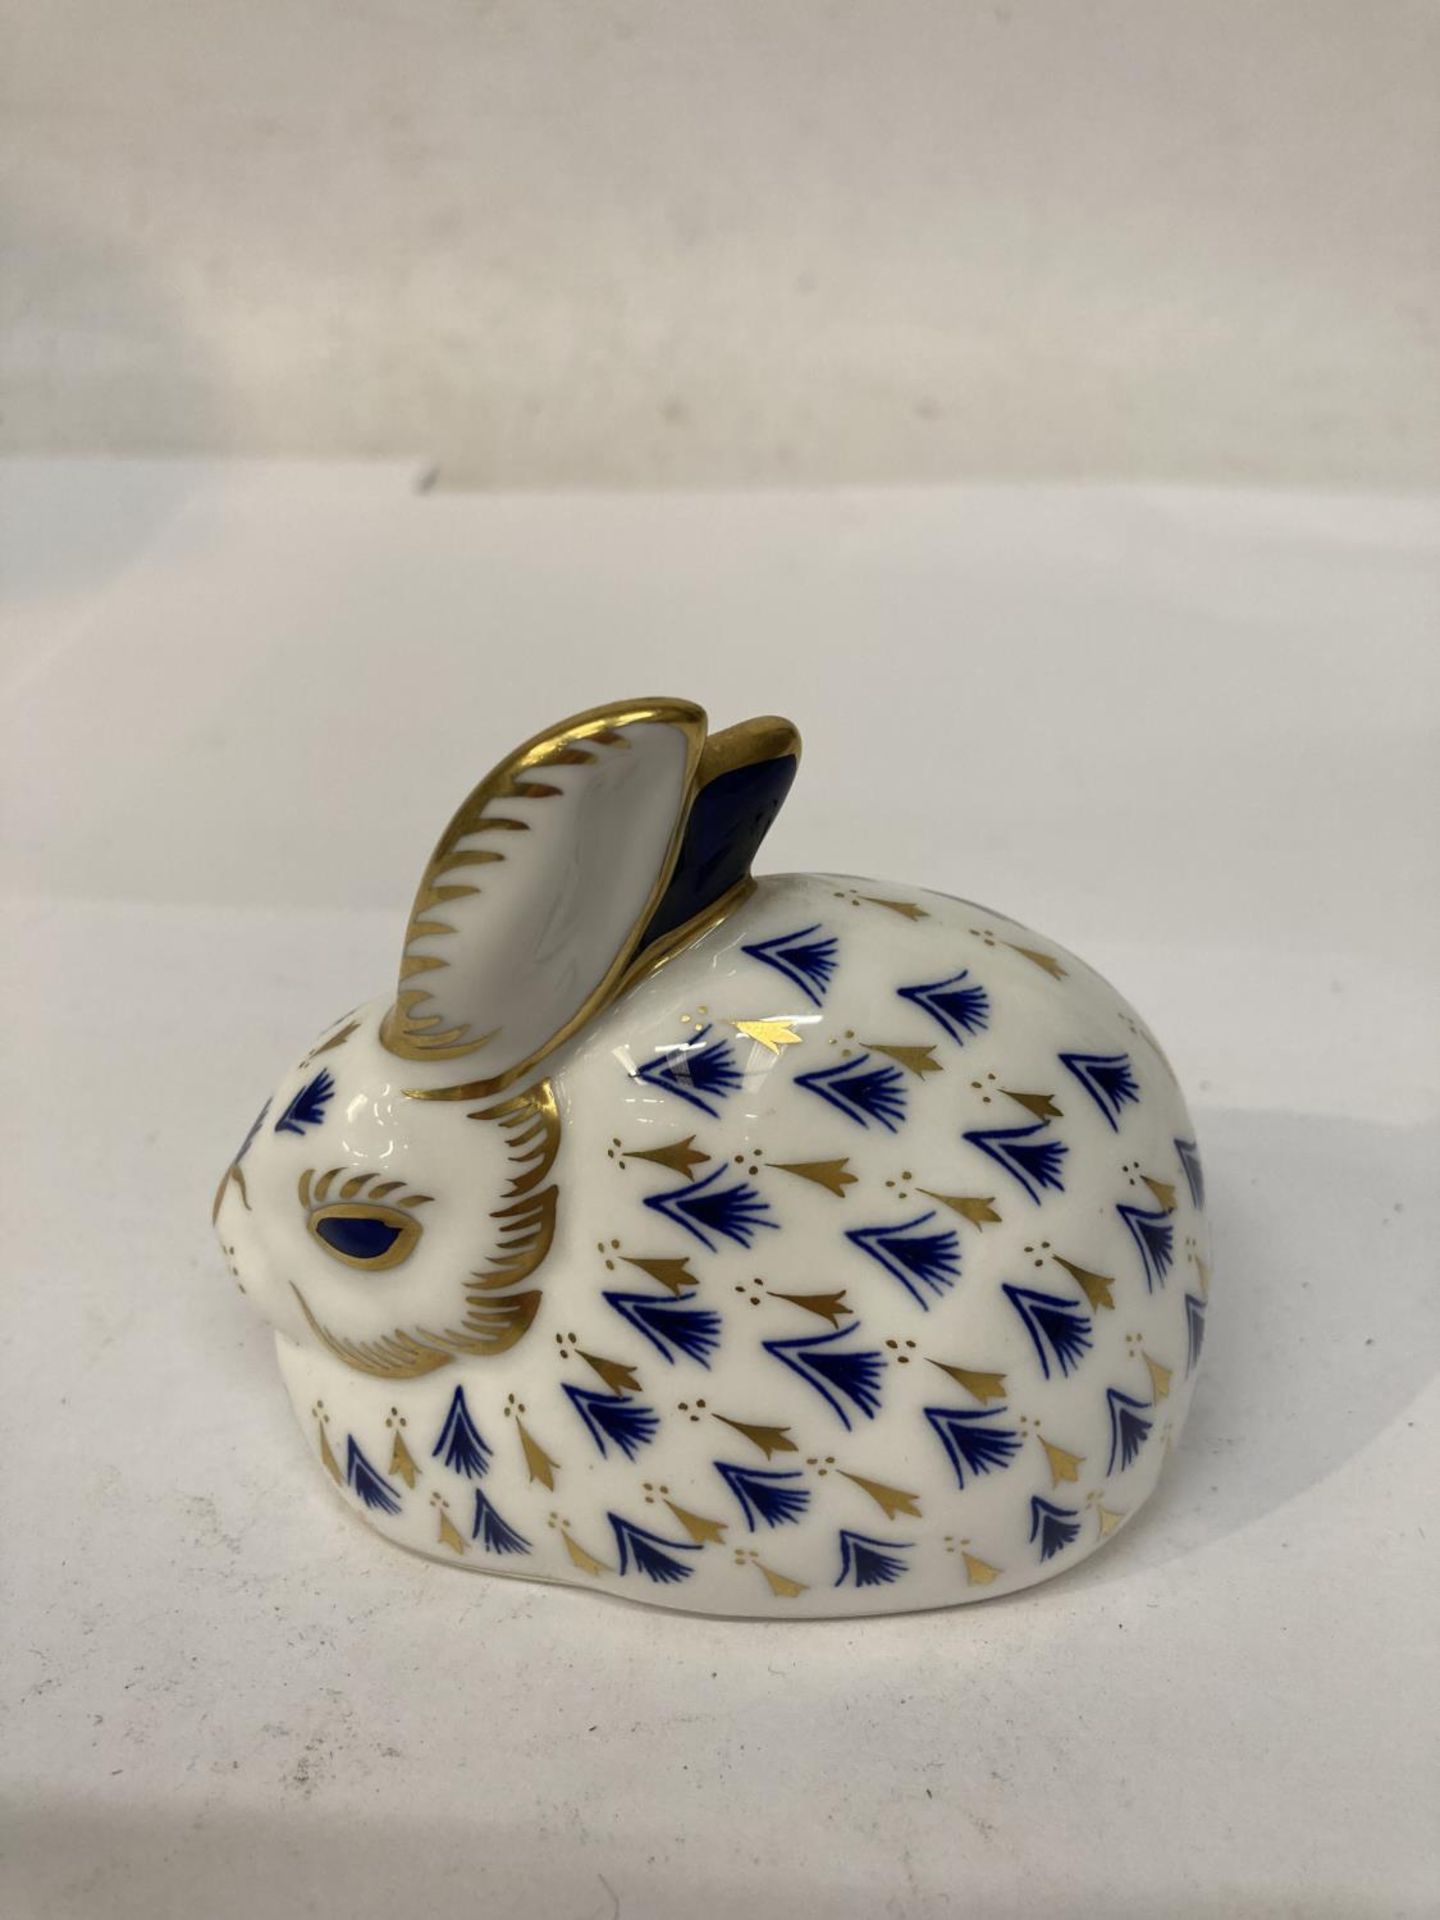 A ROYAL CROWN DERBY RABBIT PAPERWEIGHT, GOLD STOPPER